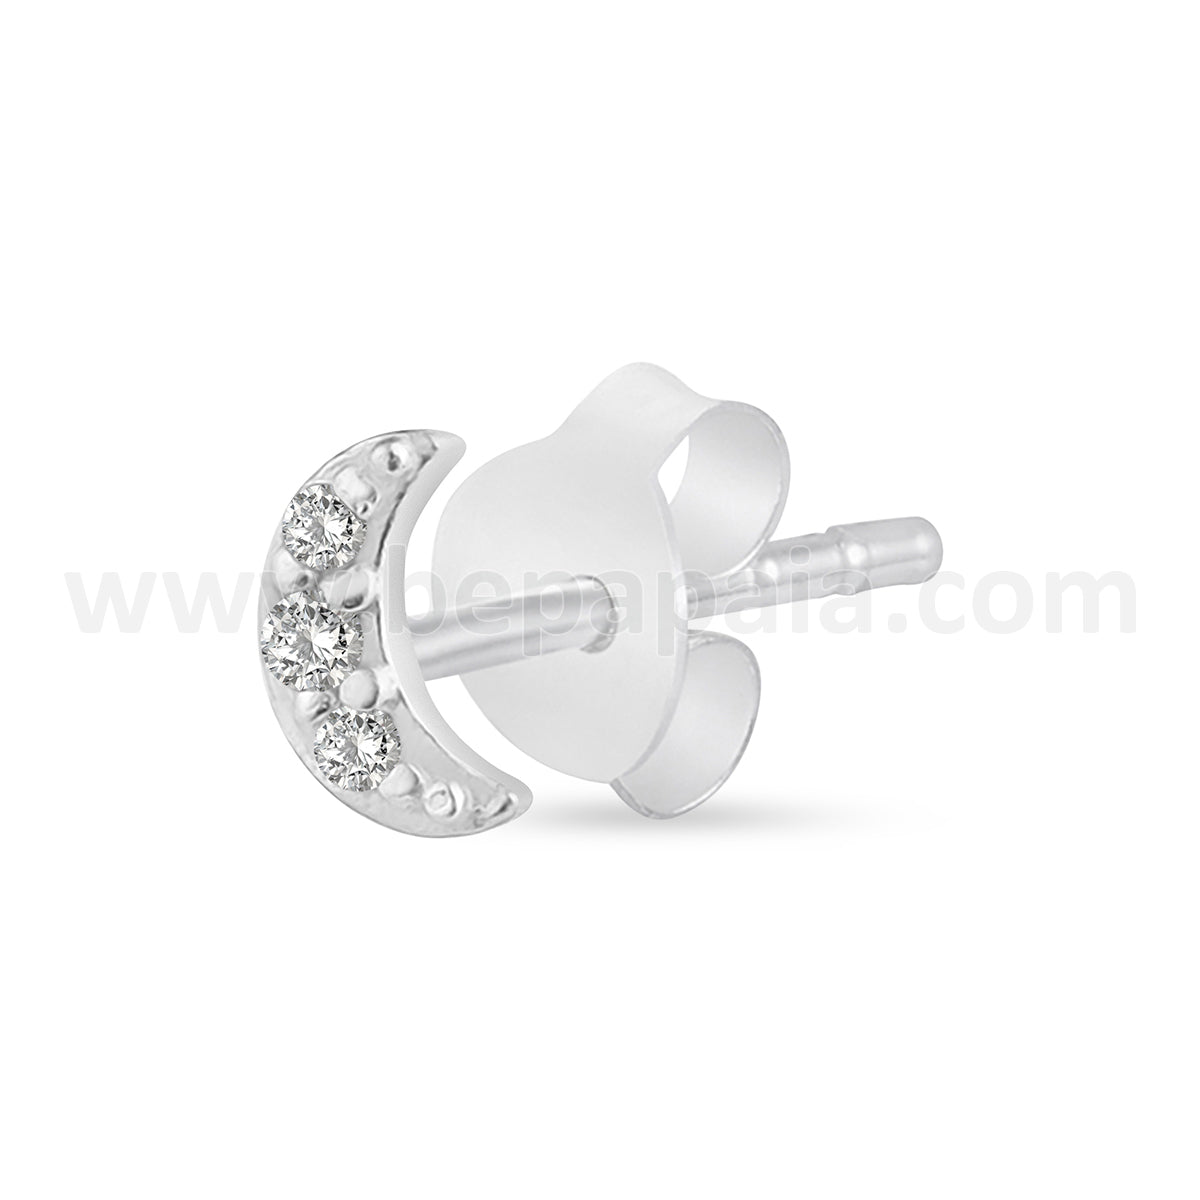 Silver ear stud with moon and gems